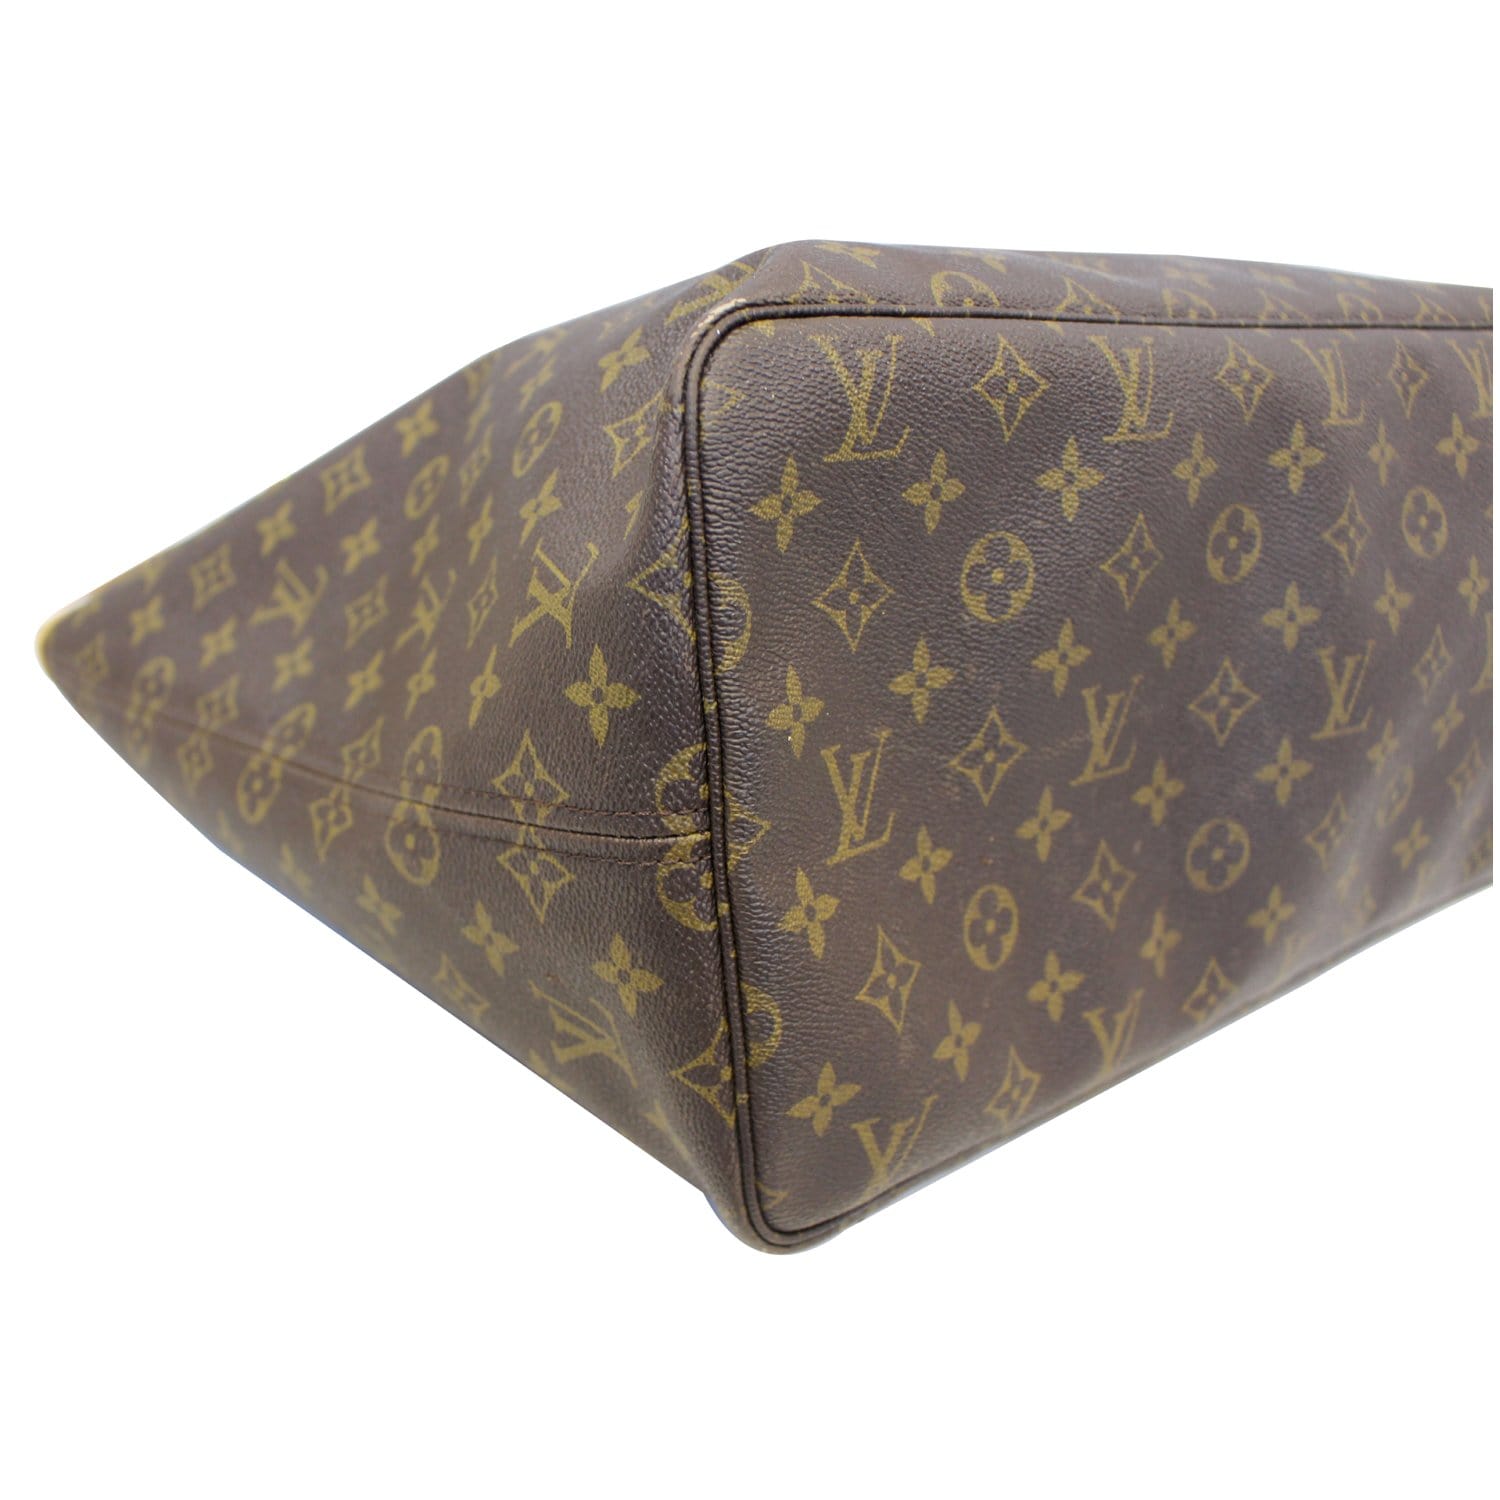 Glamifornia - GRATEFUL to still have Louis Vuitton (LV) monogram canvas  bags! New Clean HomePage PurseBop.com wrote an article titled “Where Did  All the Canvas Go? An investigative Report on the Louis